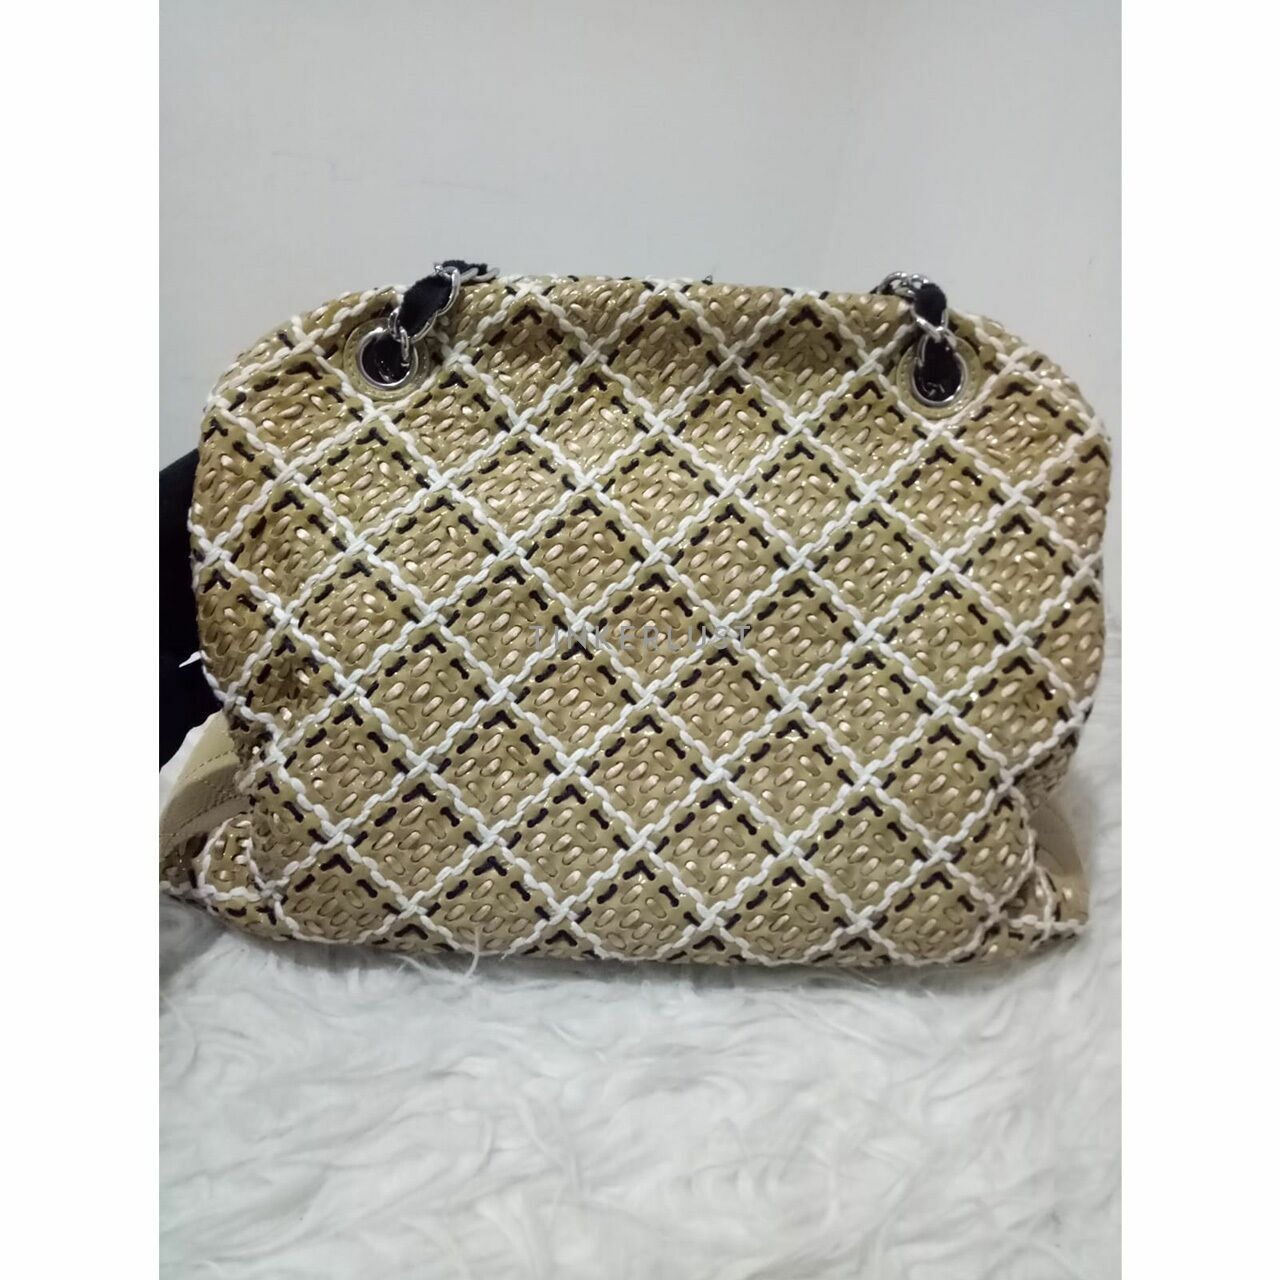 Chanel Mademoiselle Beige Woven Patent Leather Sticth Bowling #14